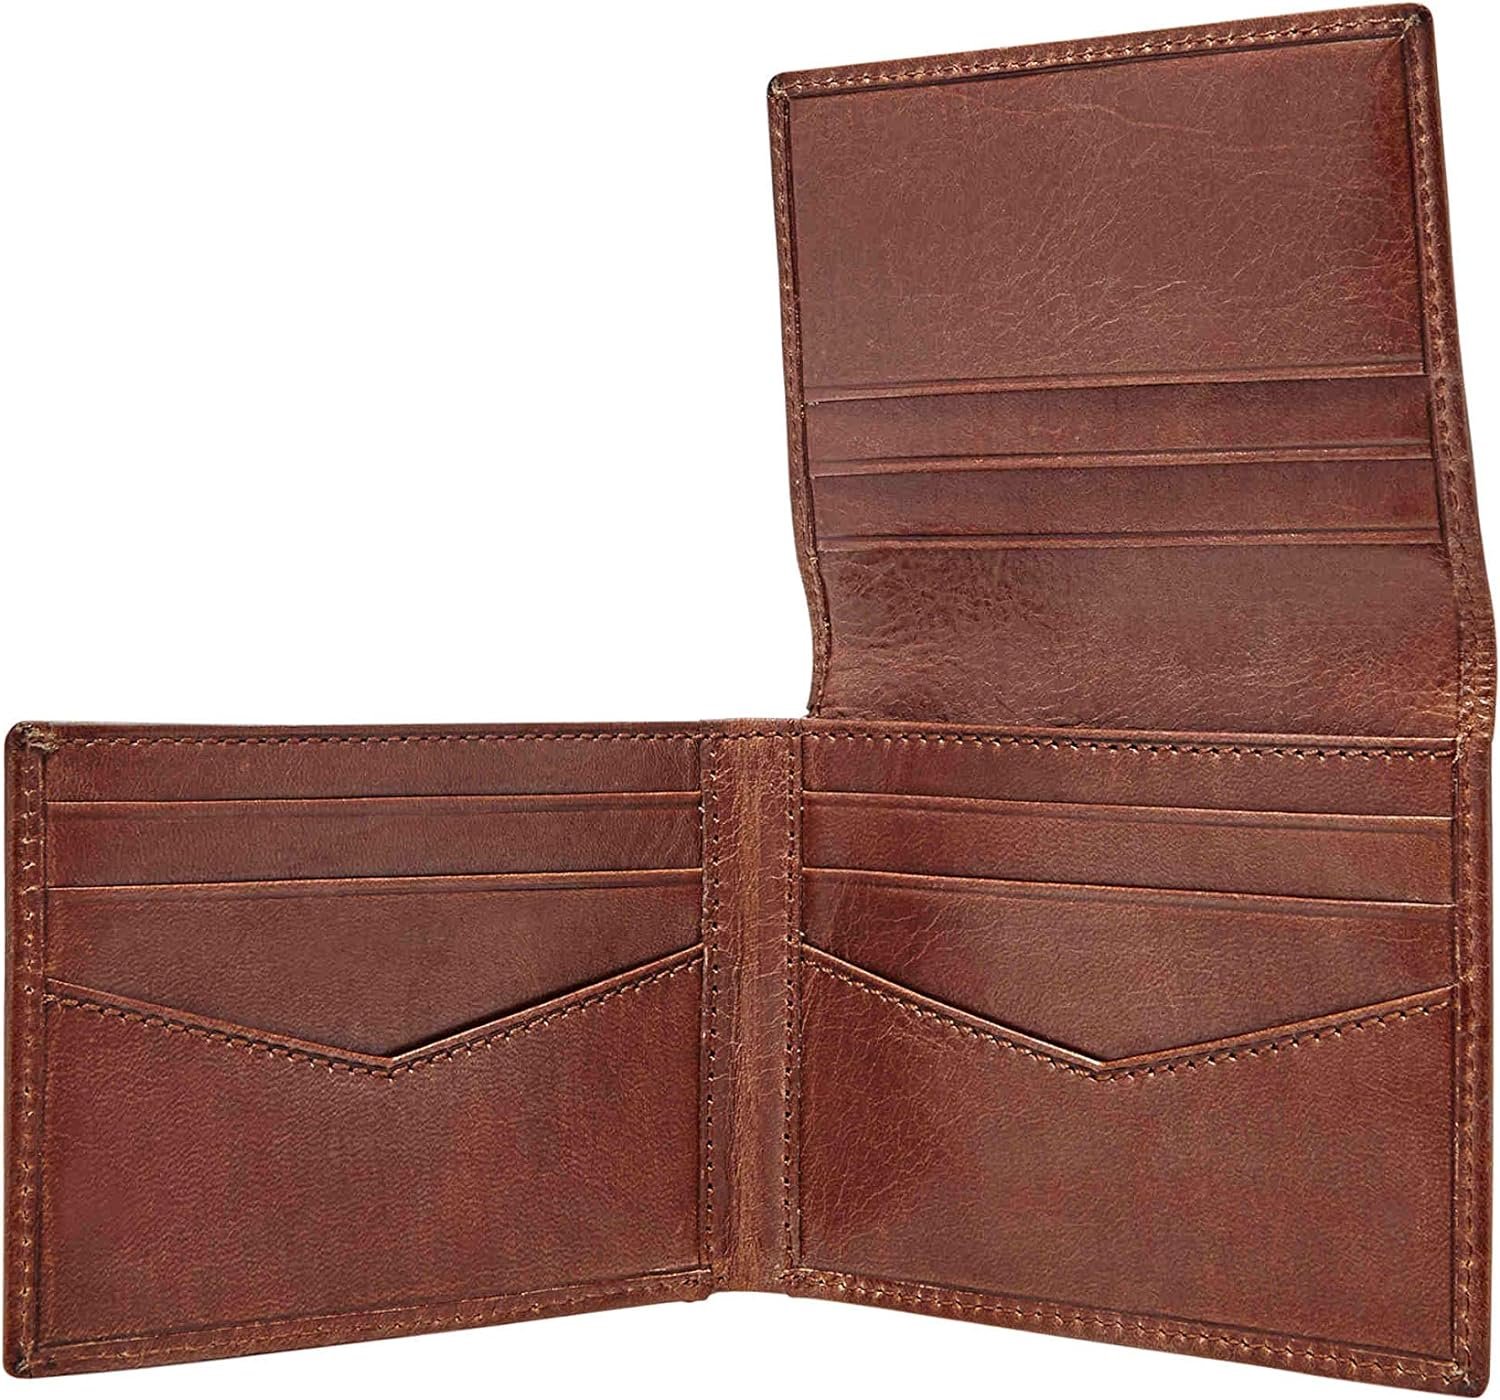 Fossil Men’s RFID-Blocking Leather Execufold Trifold Wallet Review